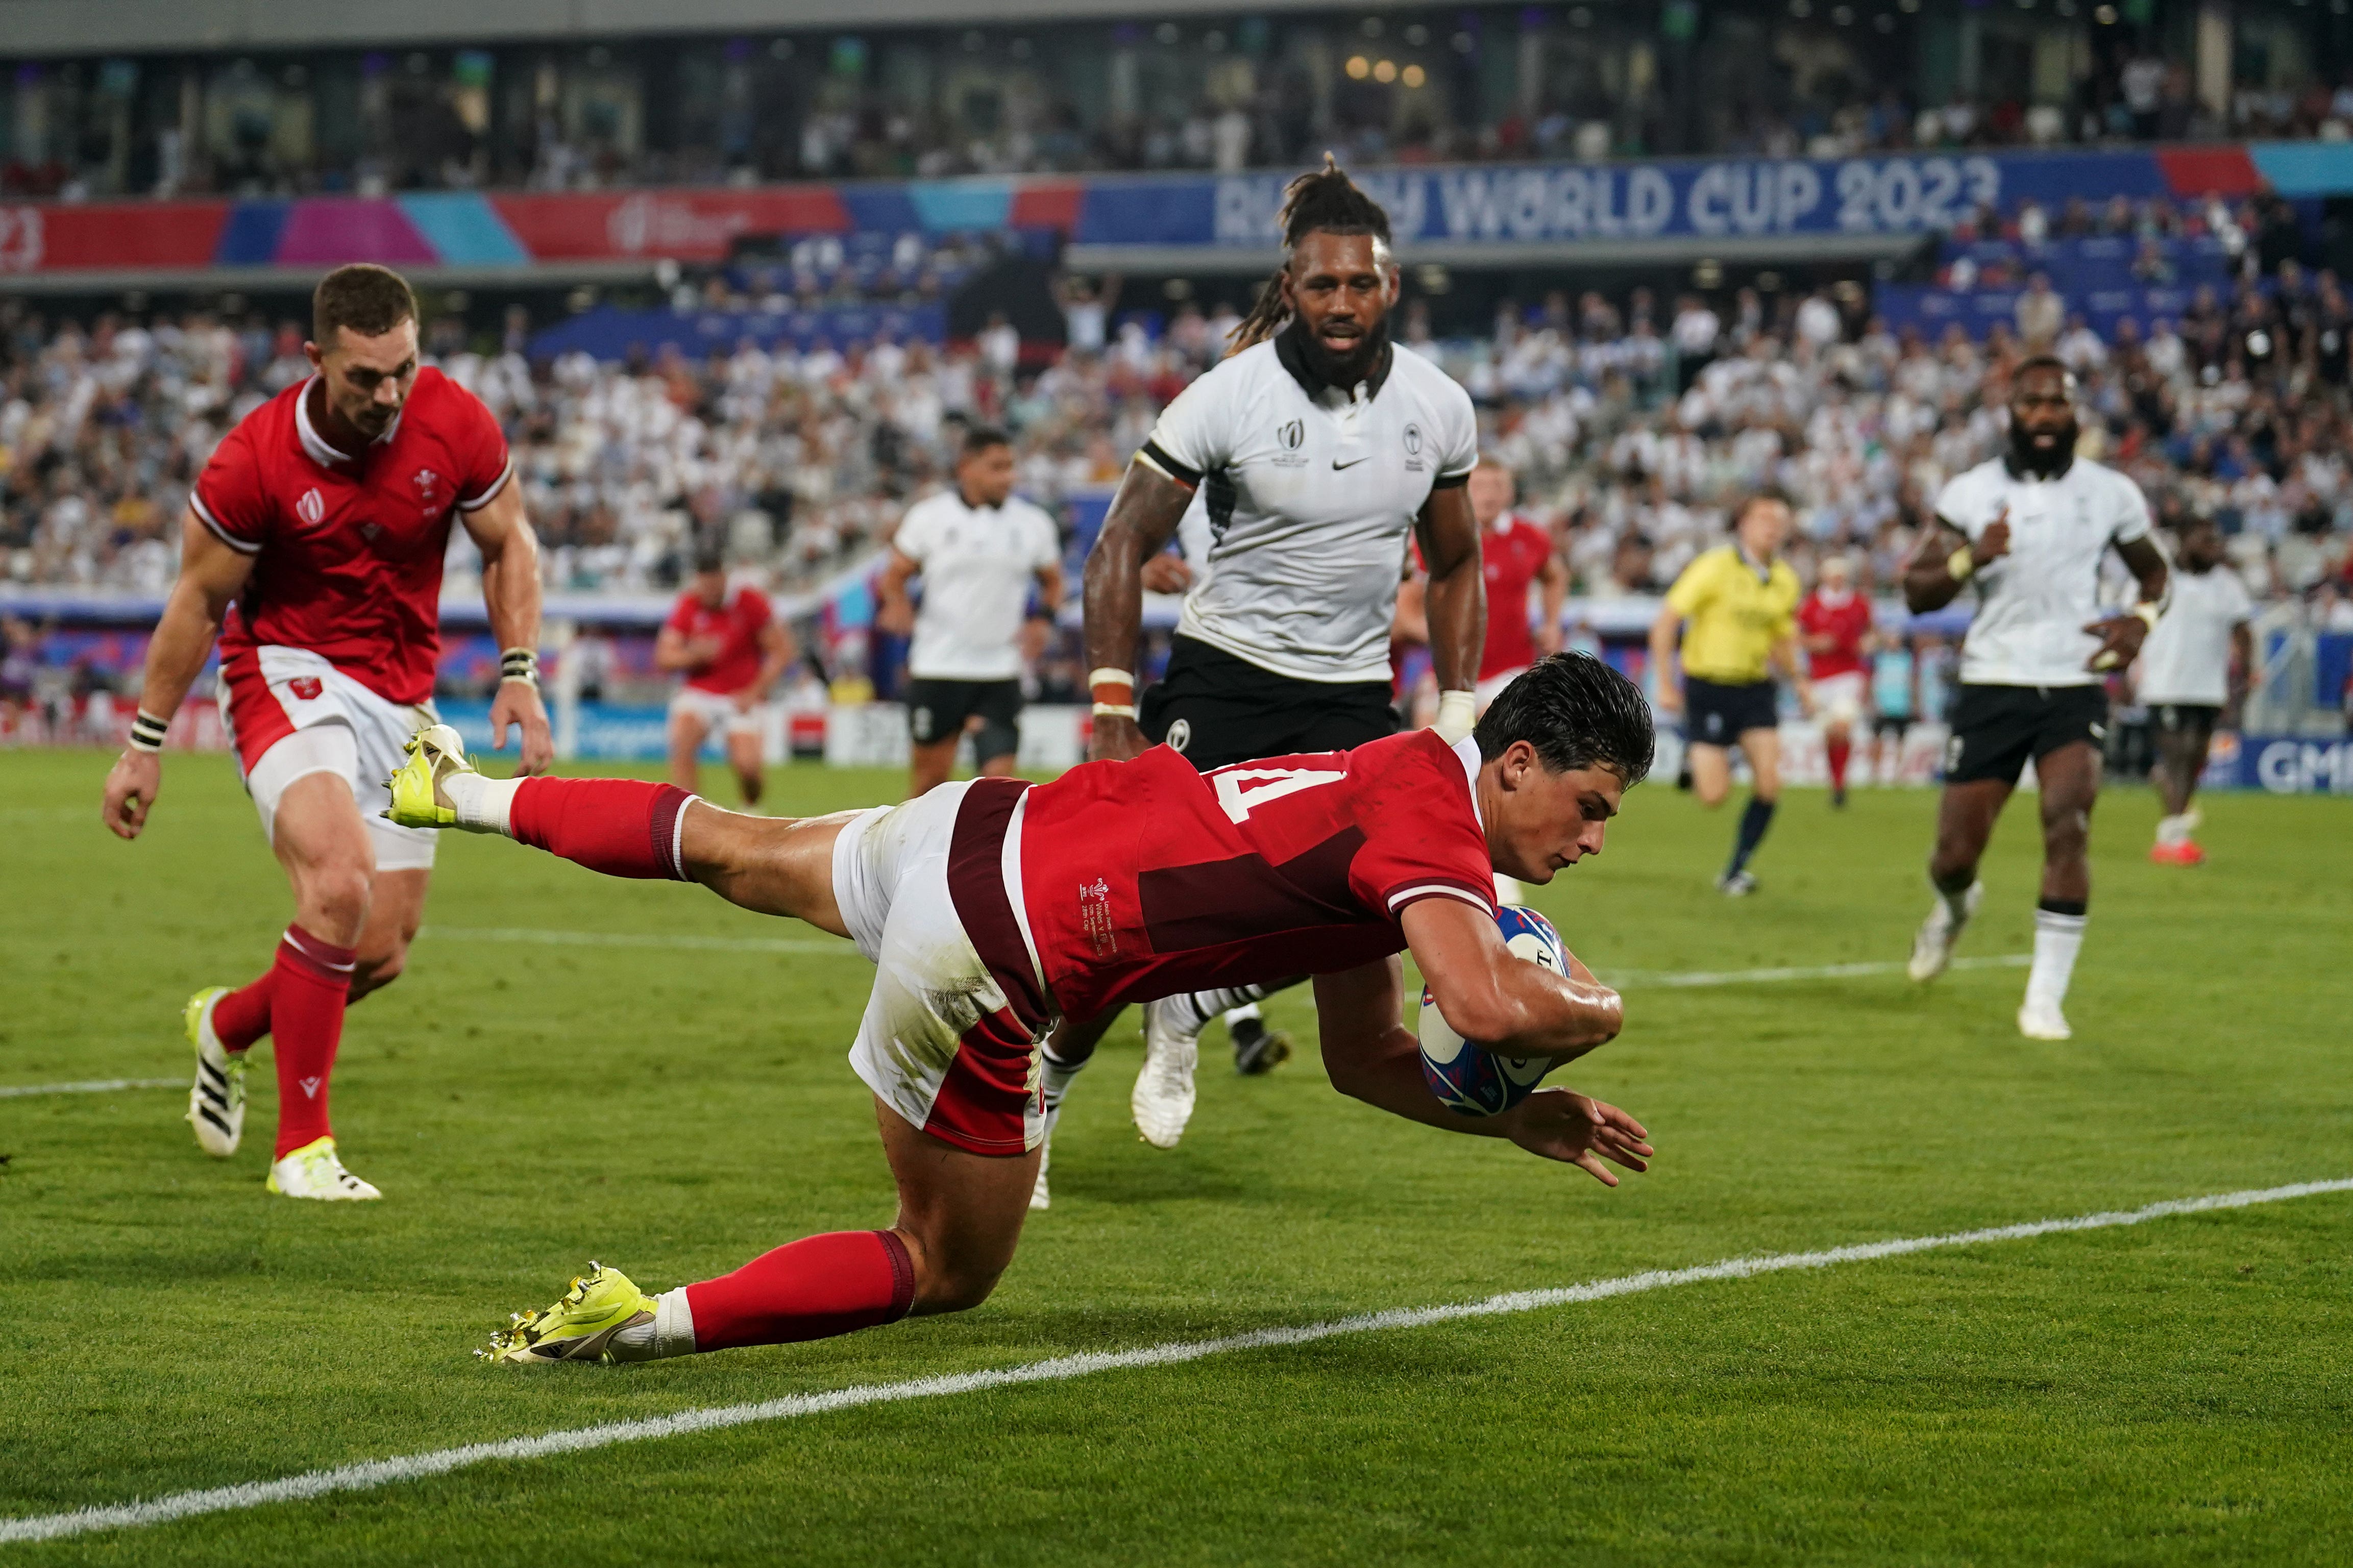 Wales opened their World Cup campaign with a thrilling victory over Fiji